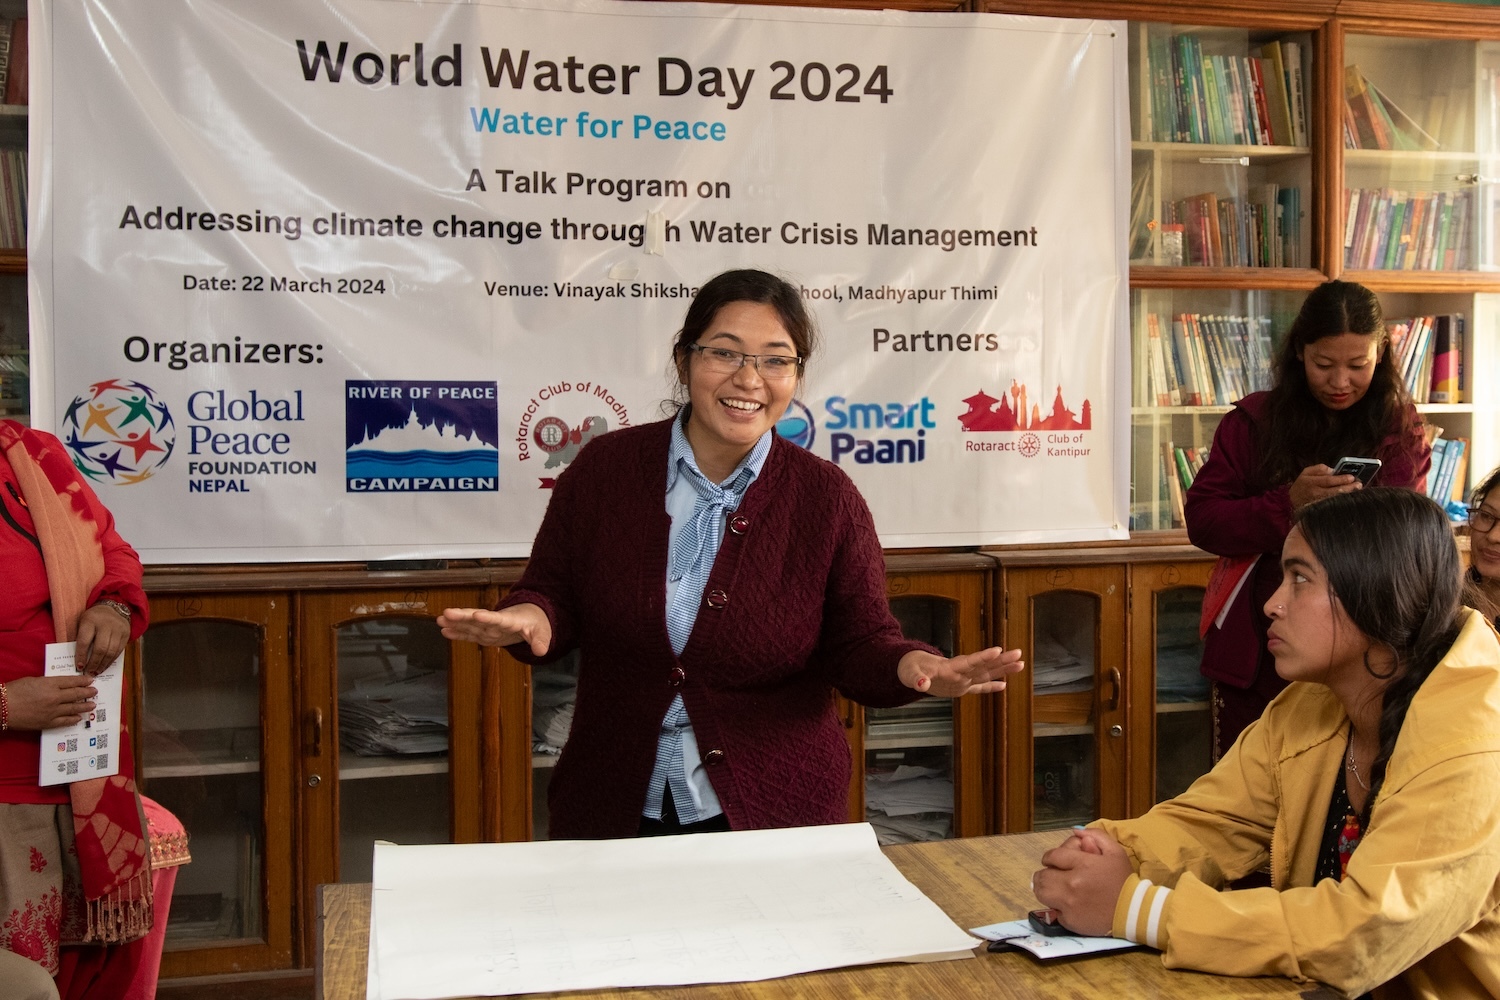 Woman at a World Water Day 2024 smiling at the camera, with attendees and informational banners in the background.